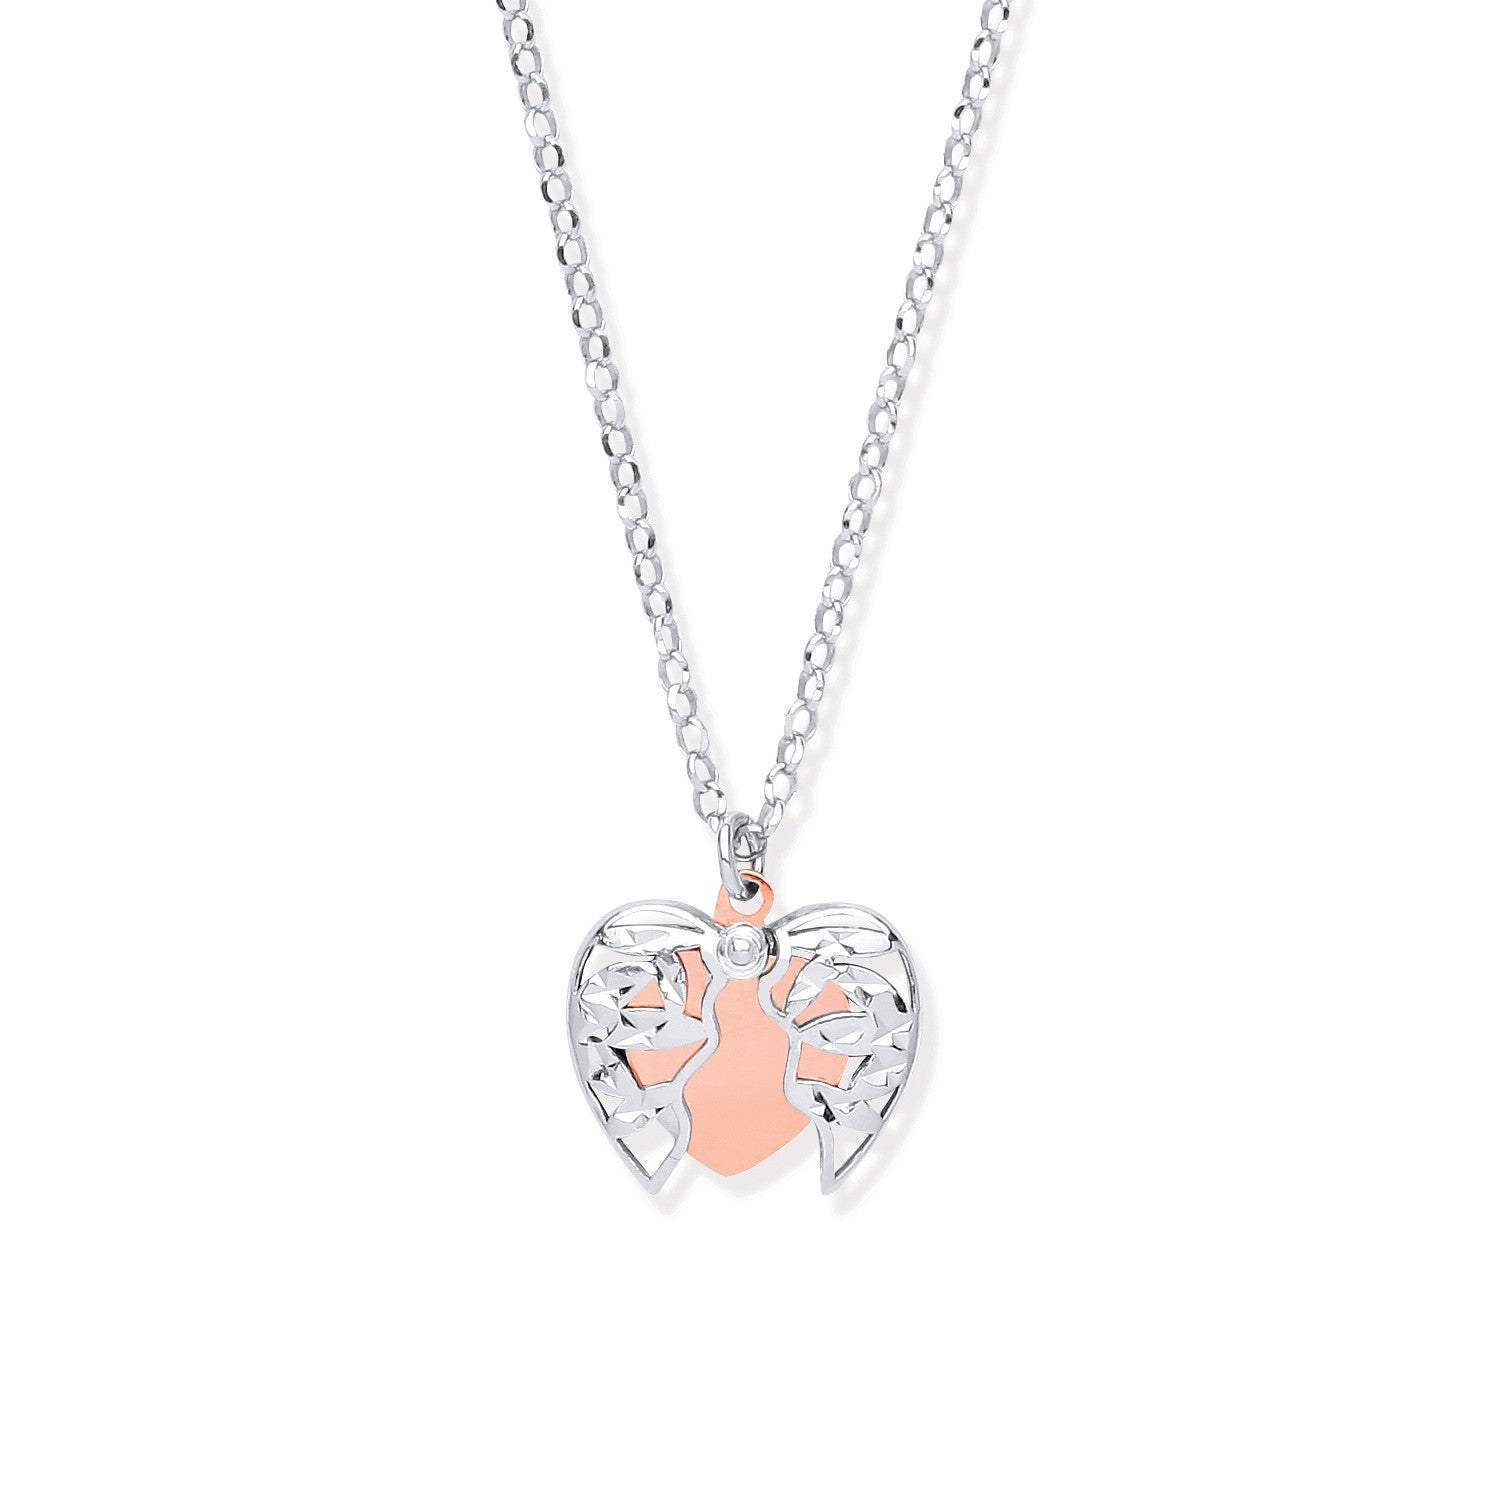 Rose Gold Plated 925 Sterling Silver Heart Pendant Necklace - FJewellery